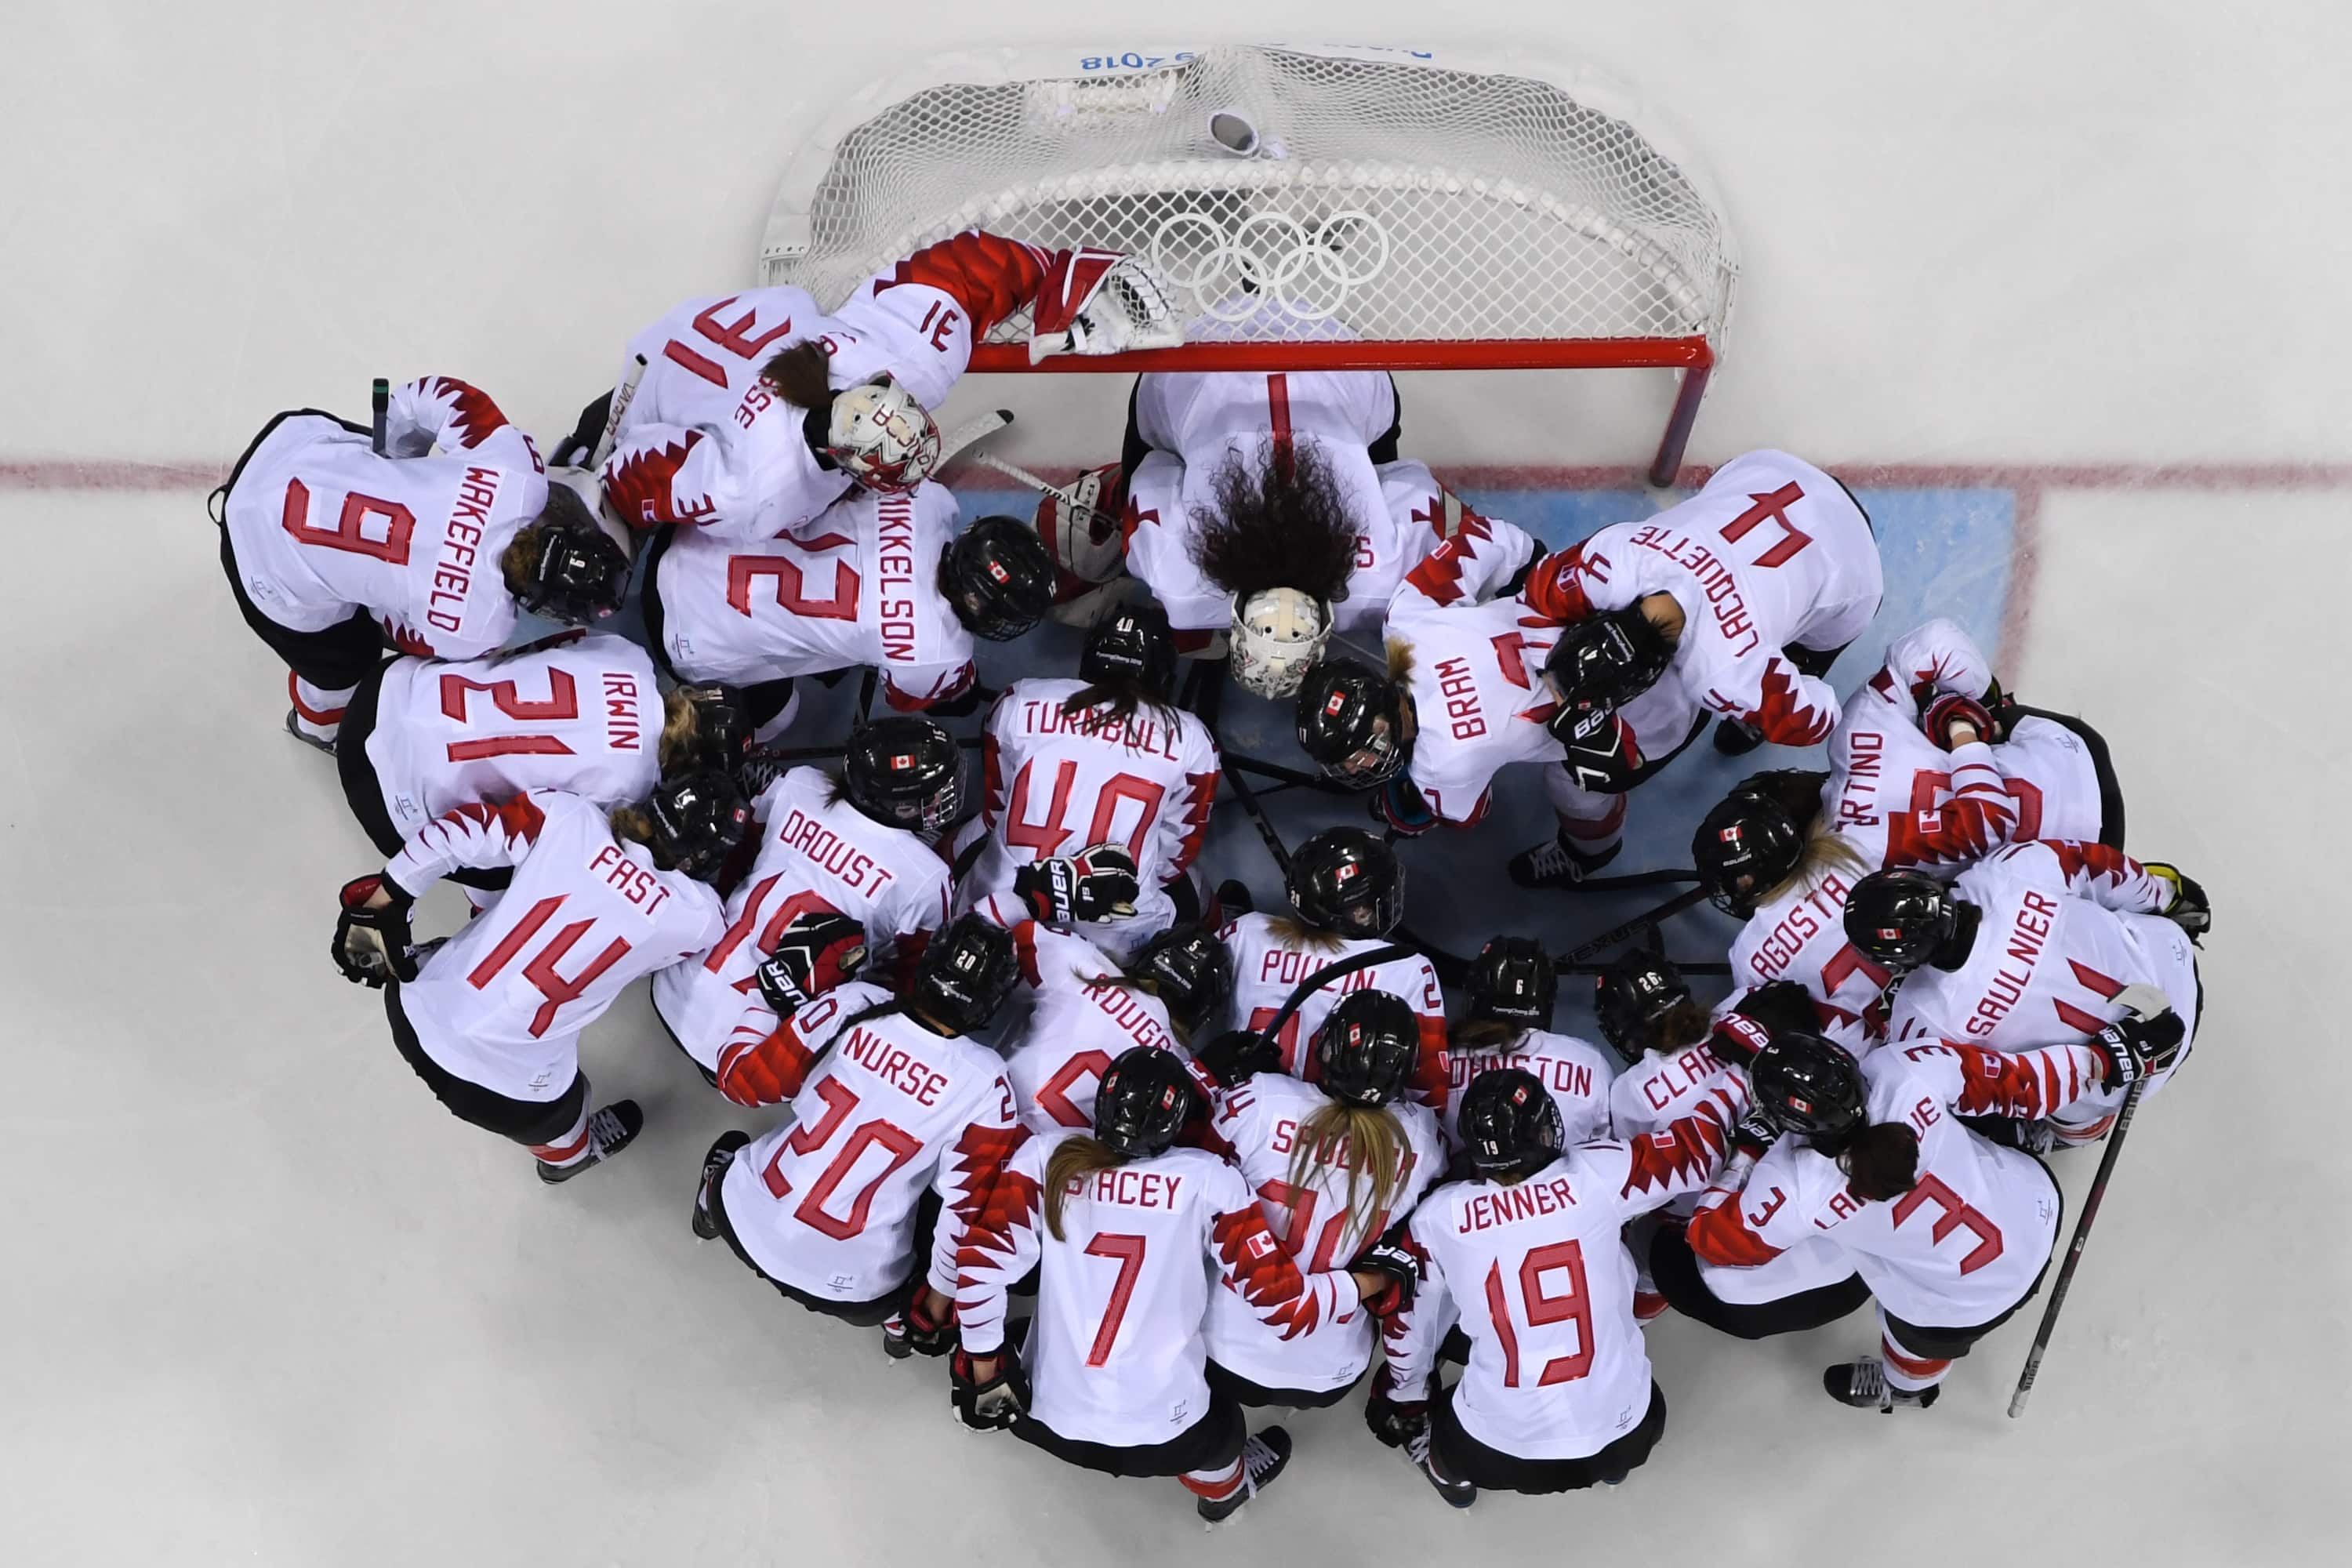 Canada-U.S. women's hockey rivalry remains the gold standard